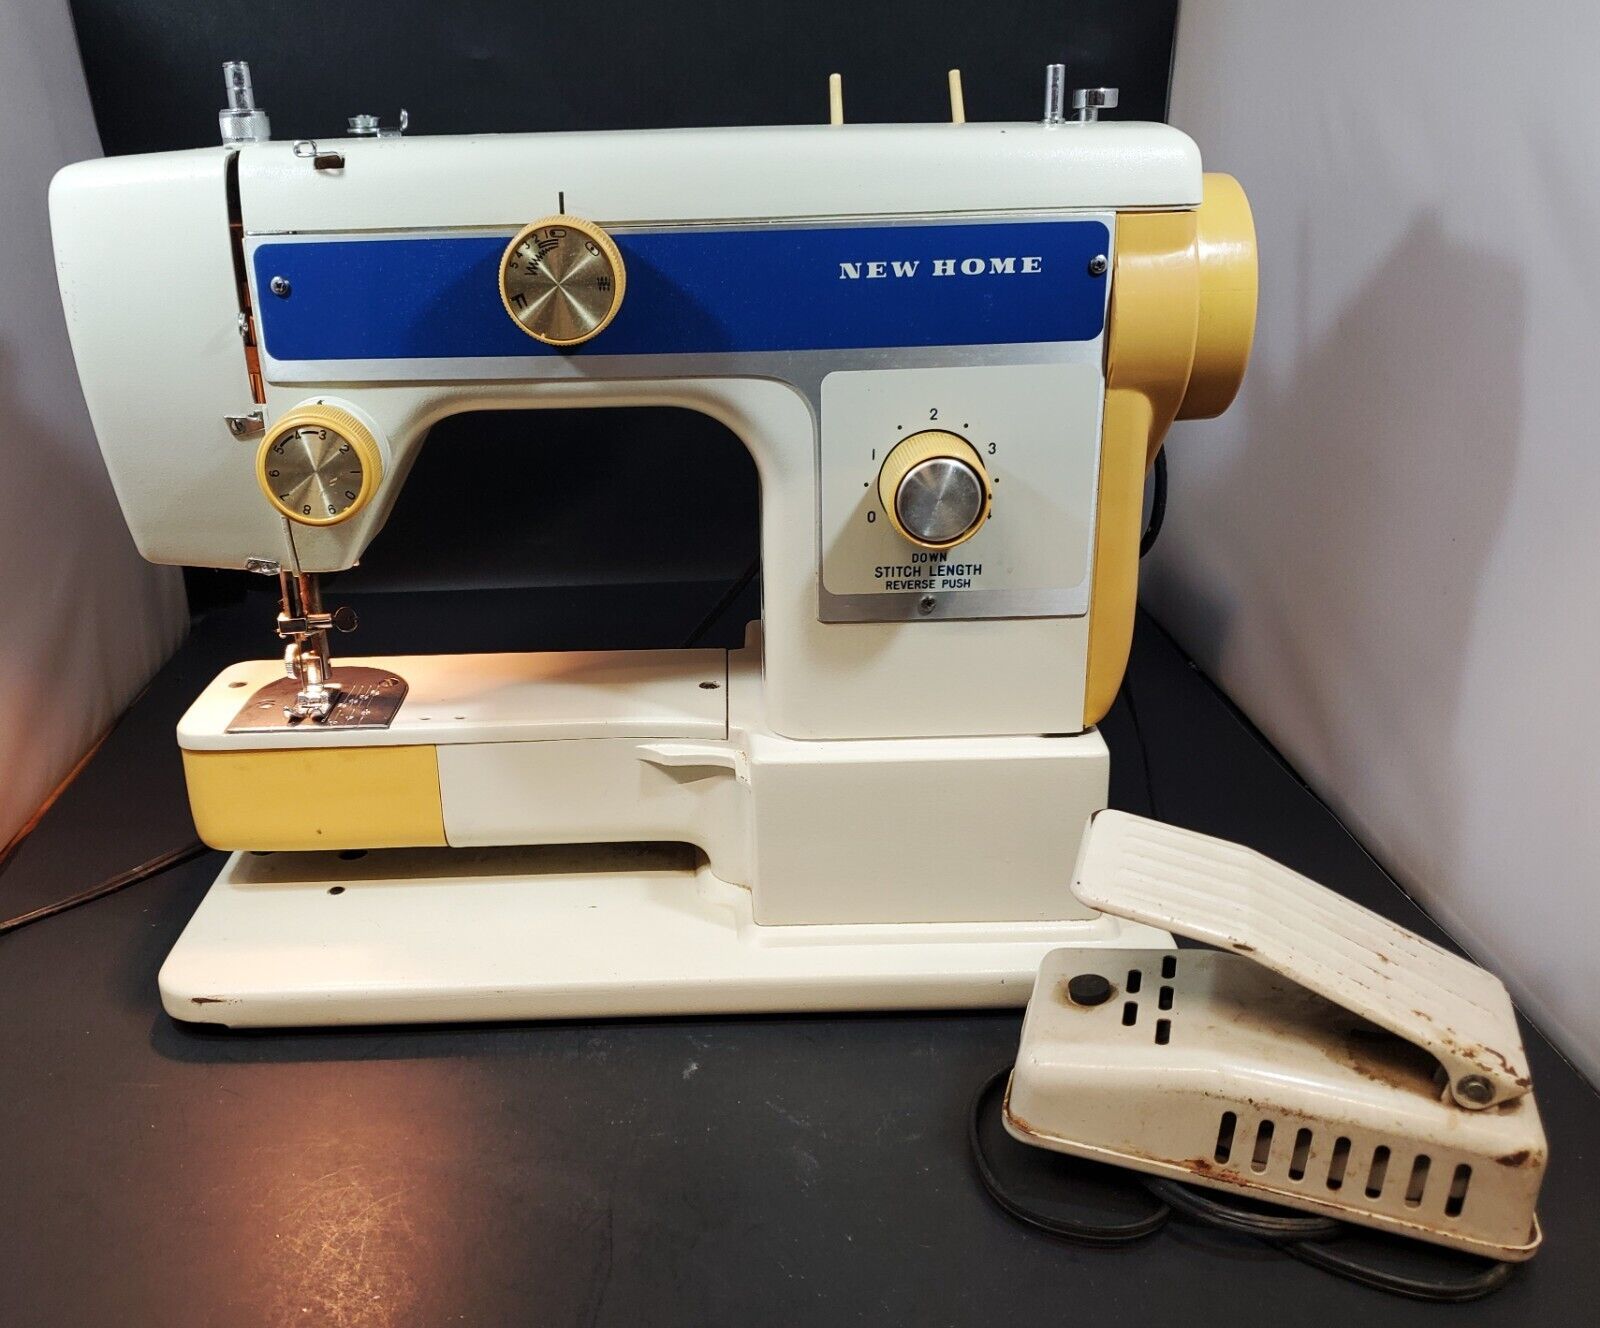 Vintage New Home Model 630 Sewing Machine by Janome Vintage Great Condition!! - $128.69